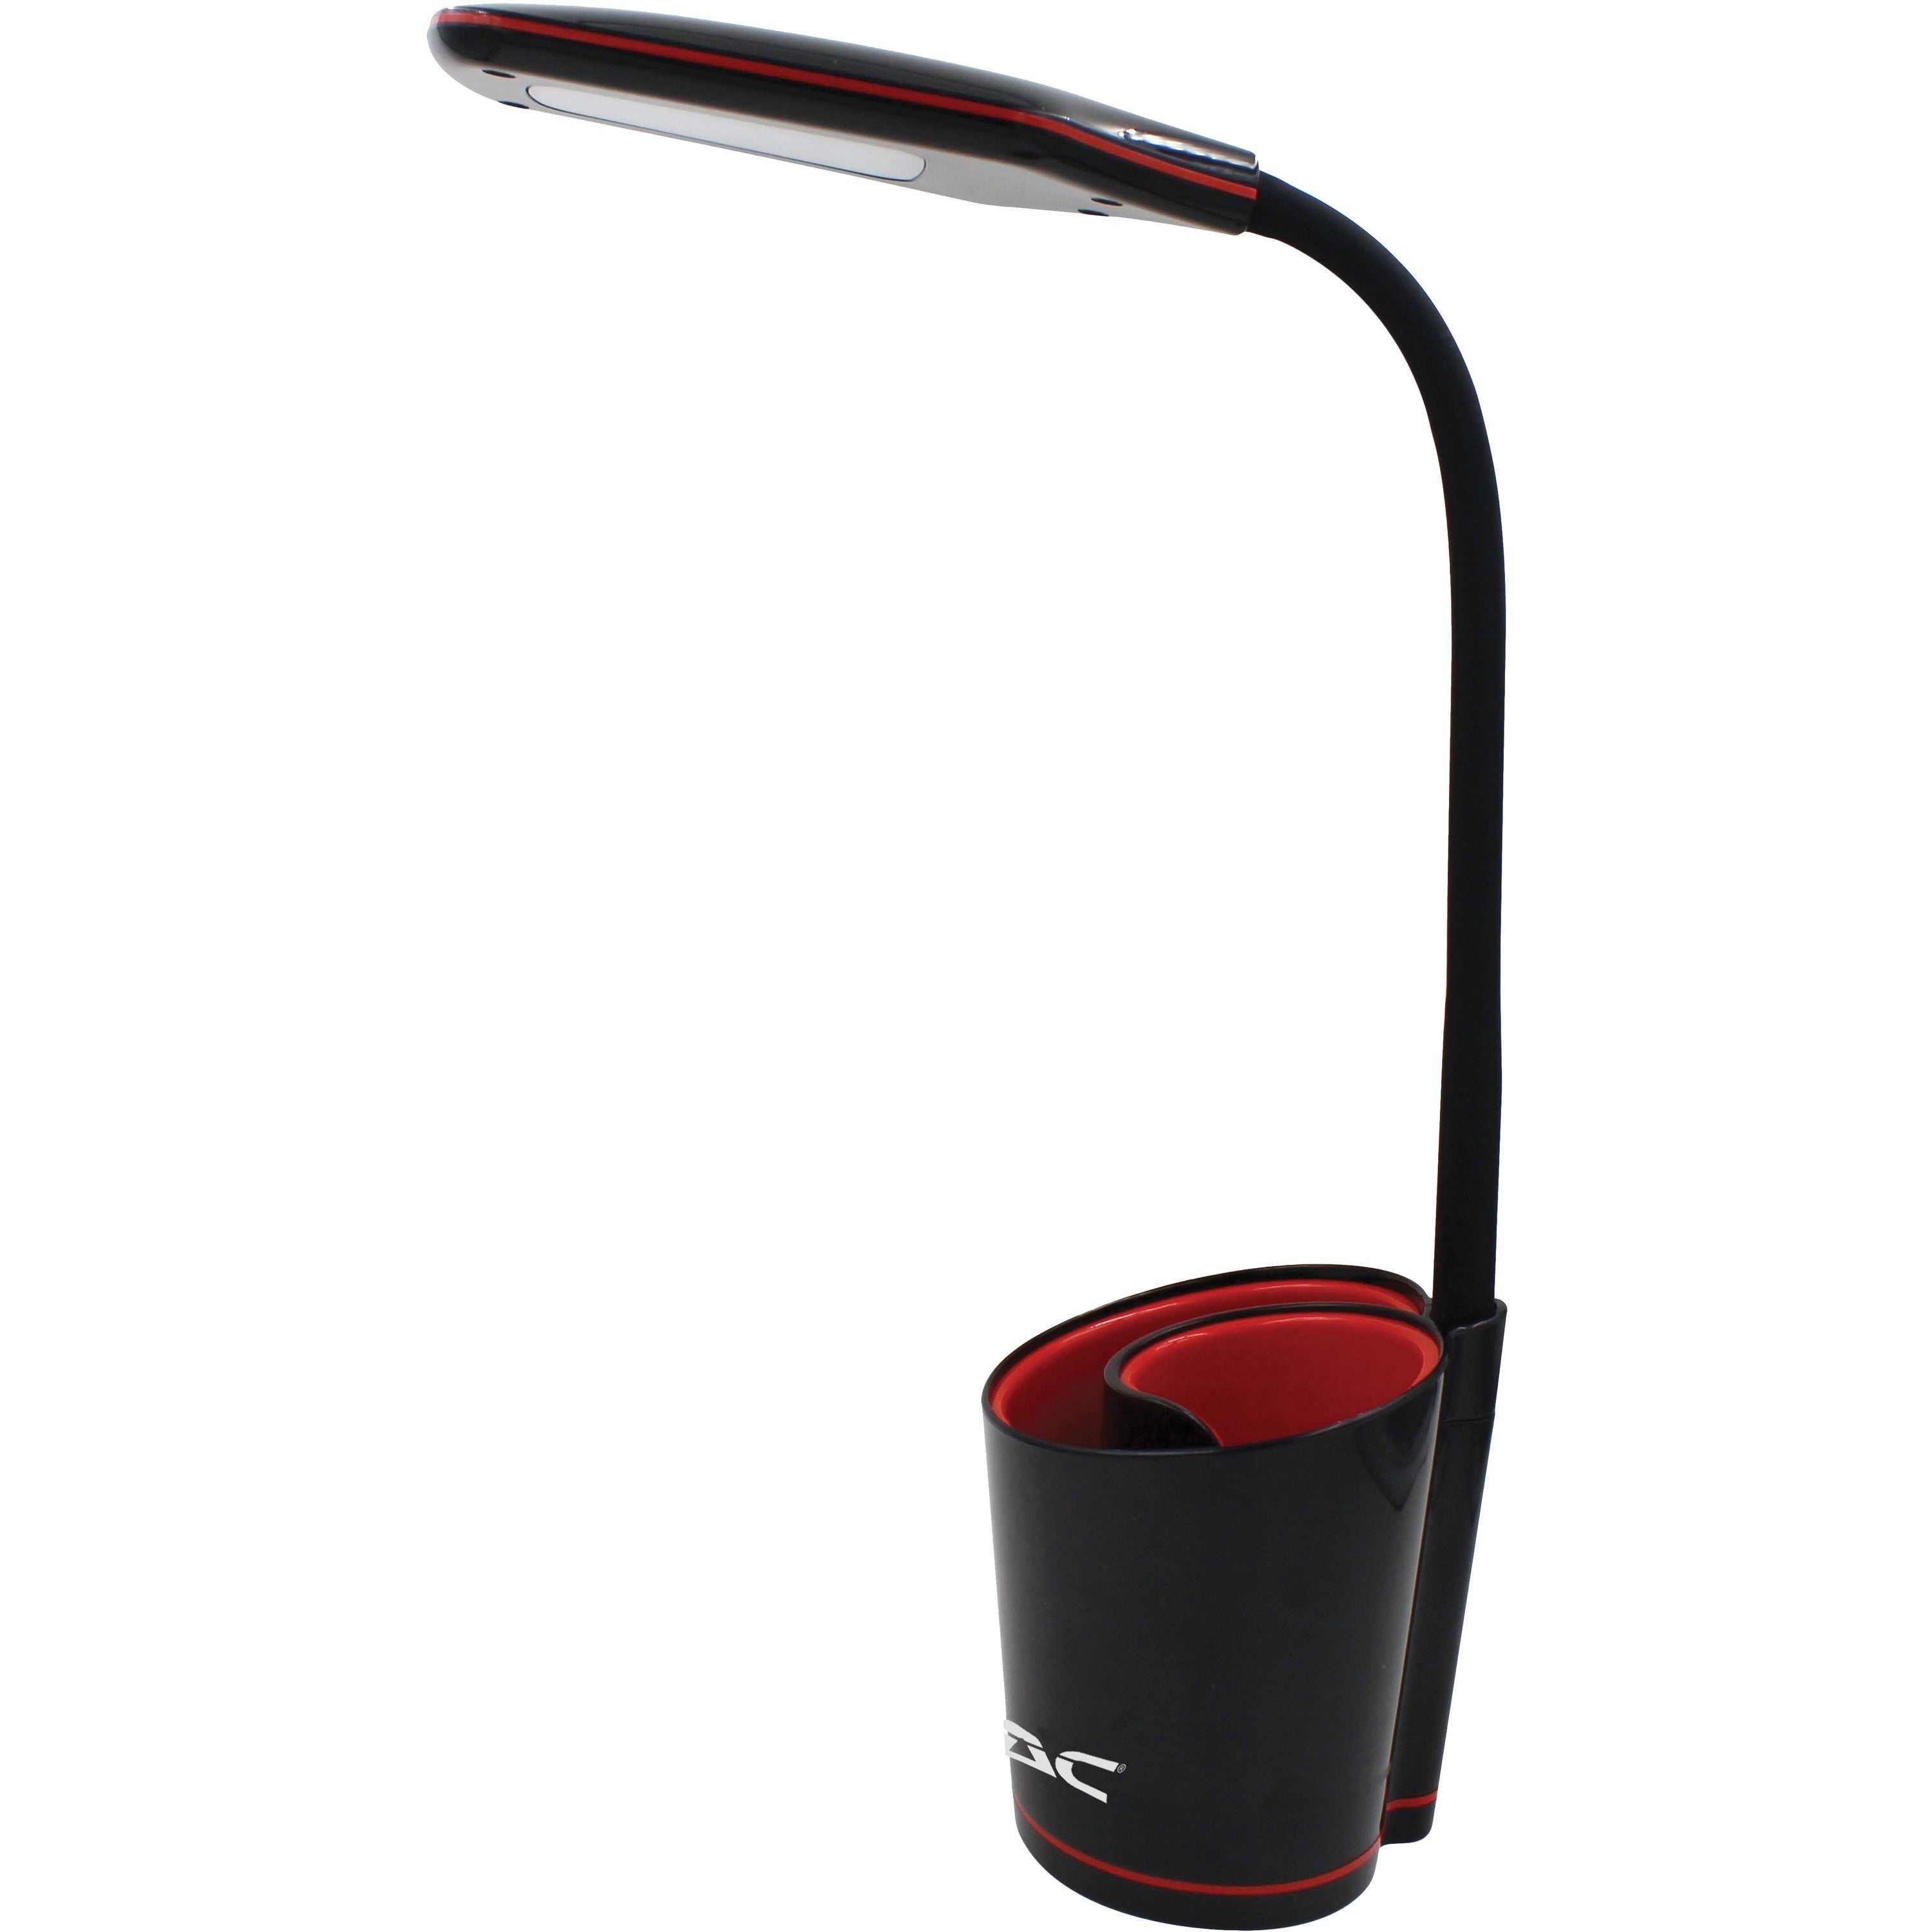 data-accessories-company-desk-lamp-16-height-550-w-led-bulb-desk-mountable-black-red-for-office-home-dorm_dta02353 - 1